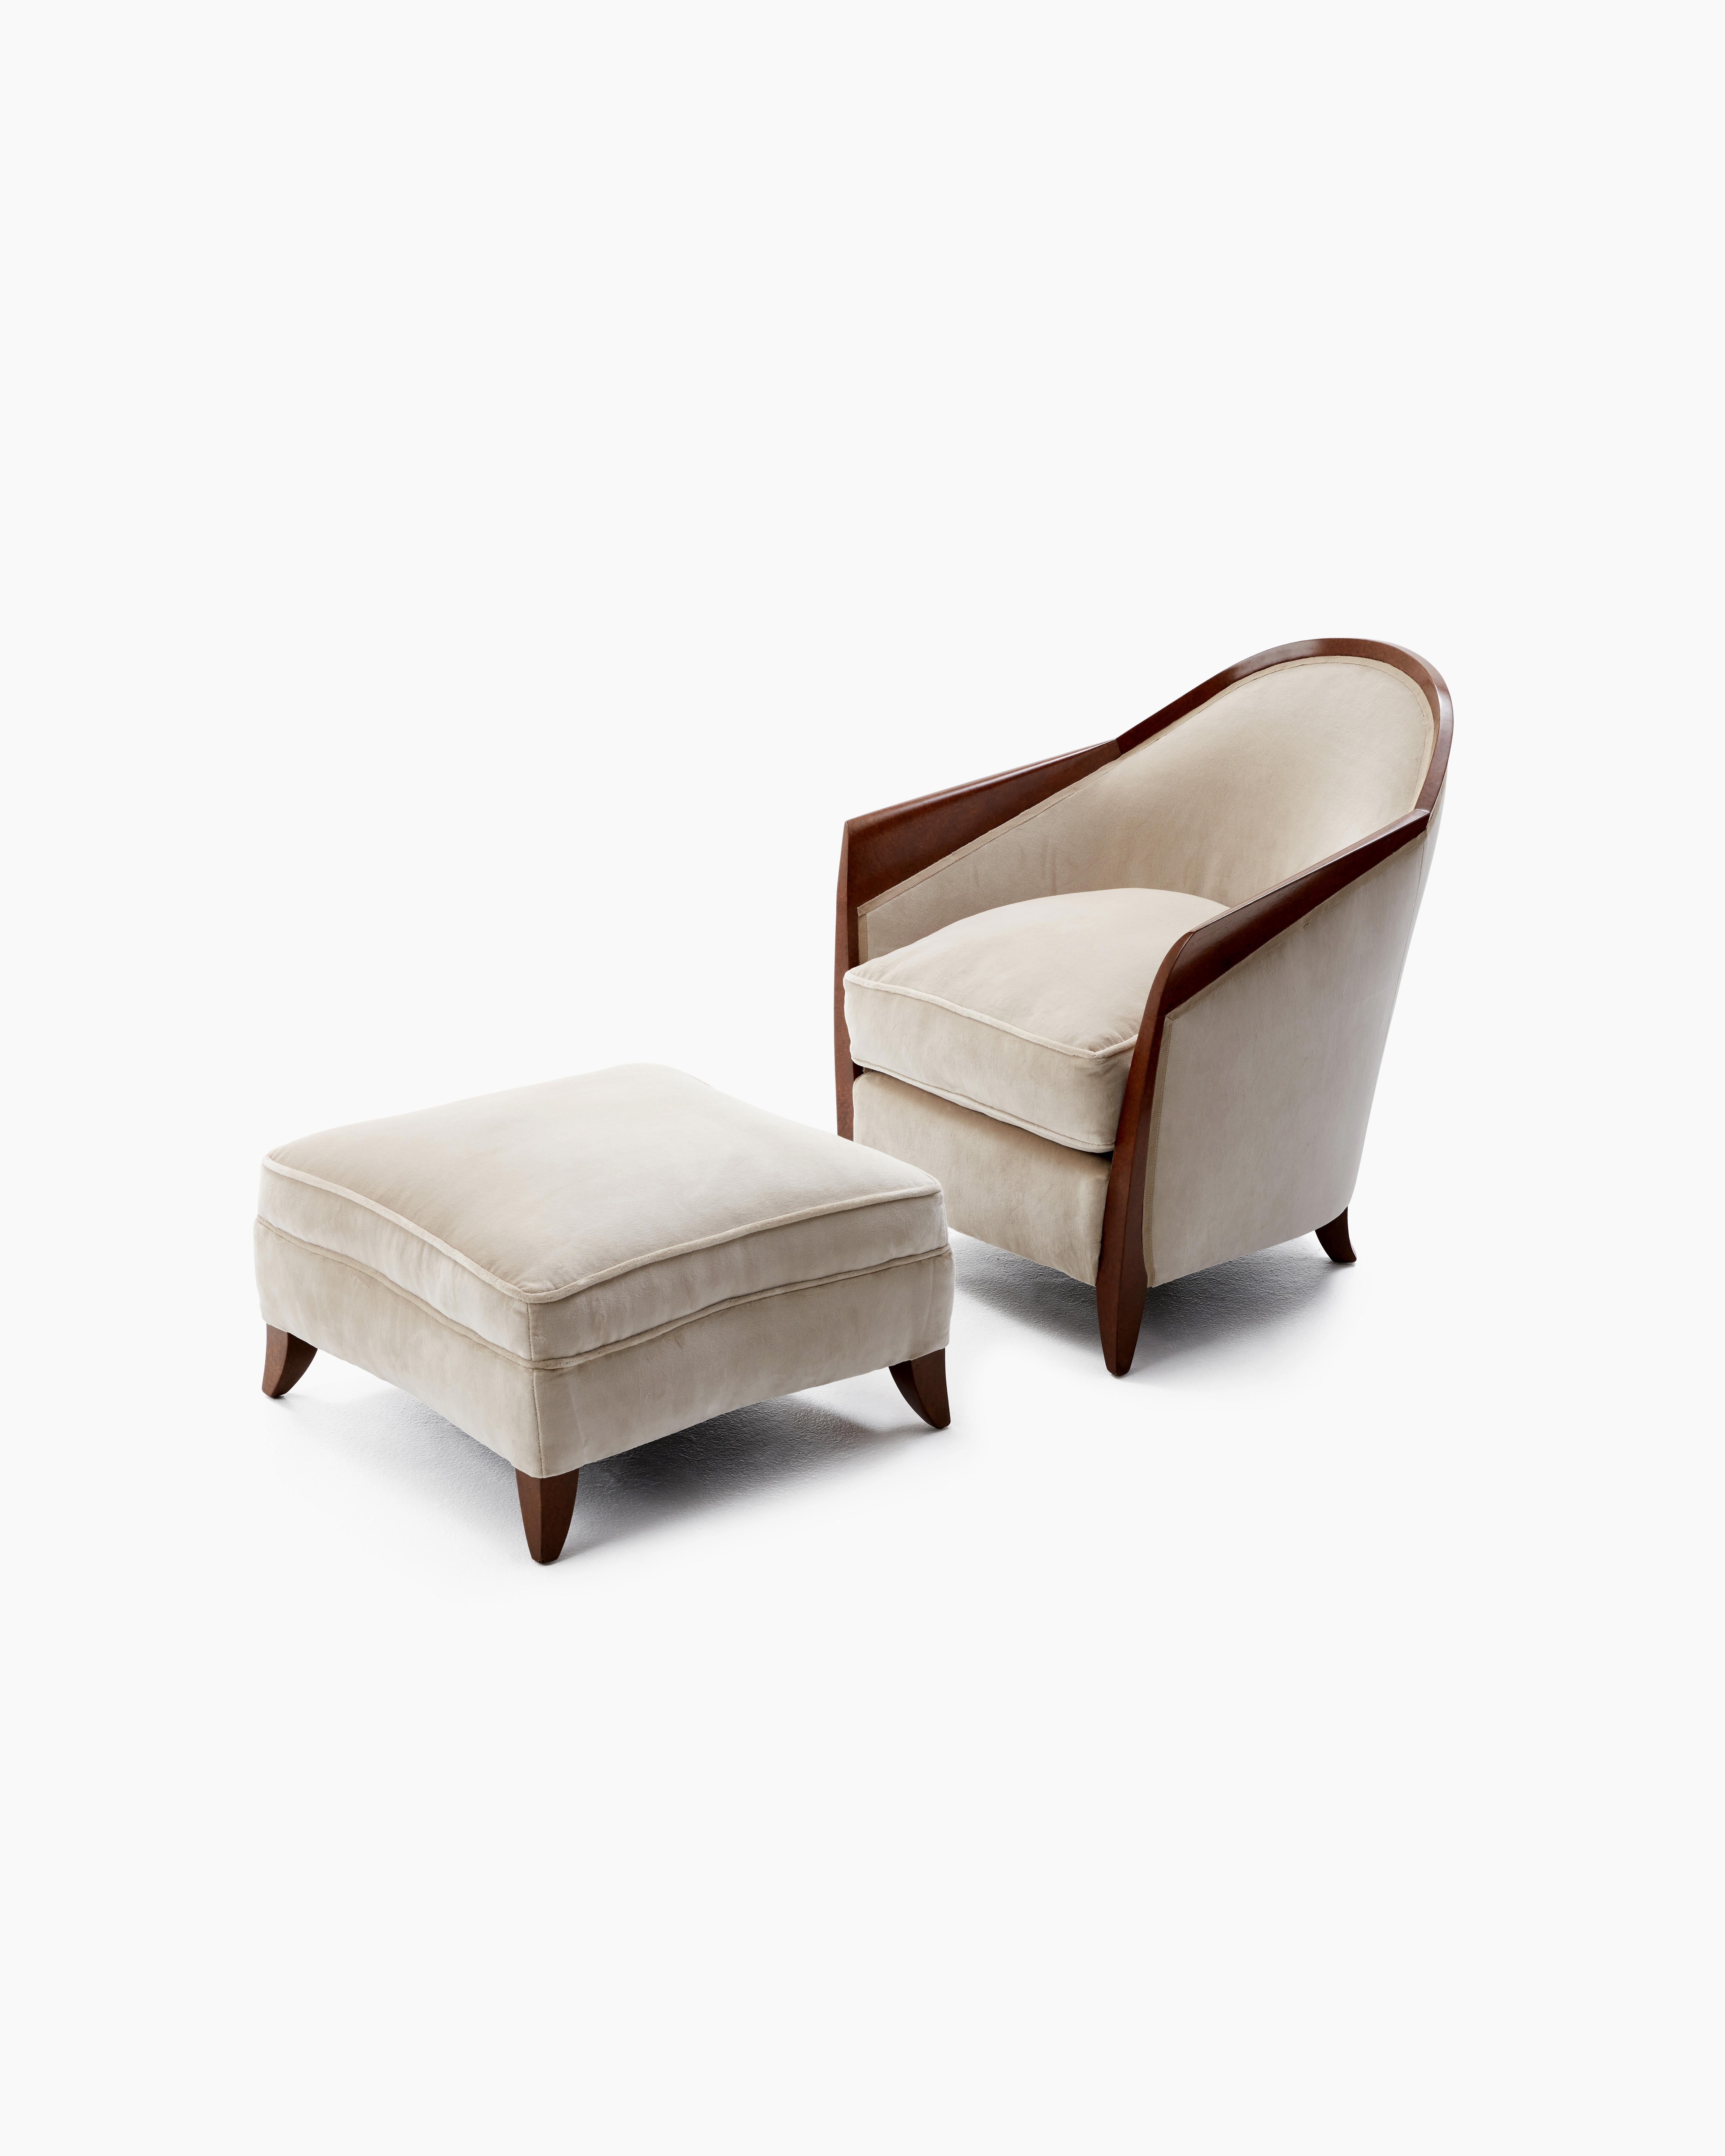 This original armchair and footstool in the style of distinguished French interior design firm Dominique, dating back to the 1930s Art Deco era, upholds the essential characteristics of understated luxury and sophistication of form.

Restored to